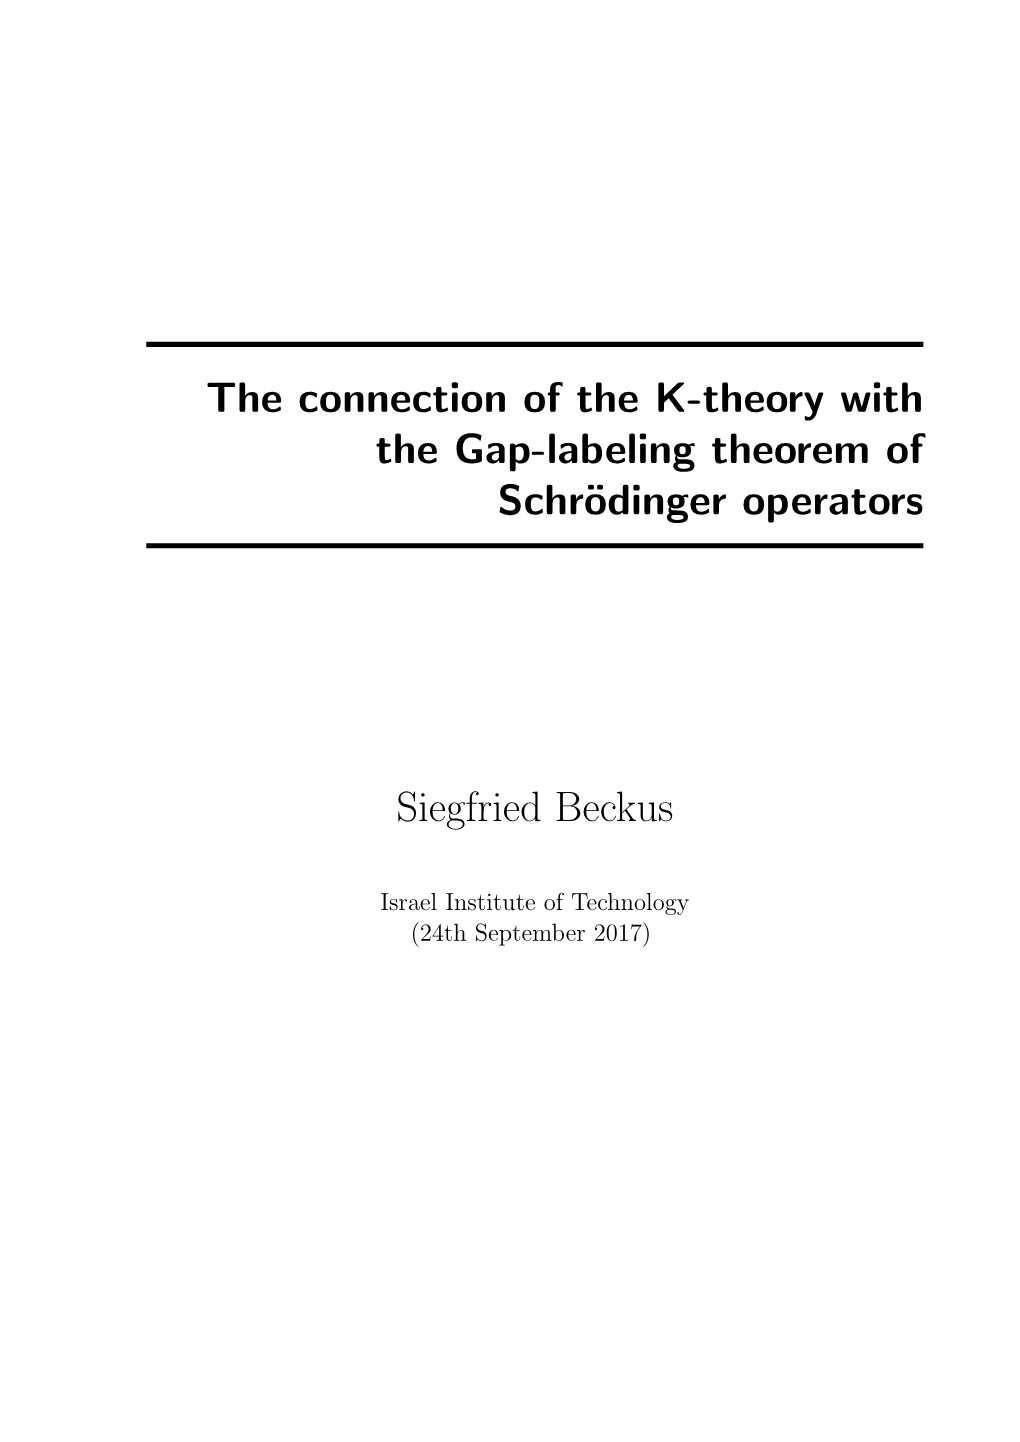 The Connection of the K-Theory with the Gap-Labeling Theorem of Schr¨Odingeroperators